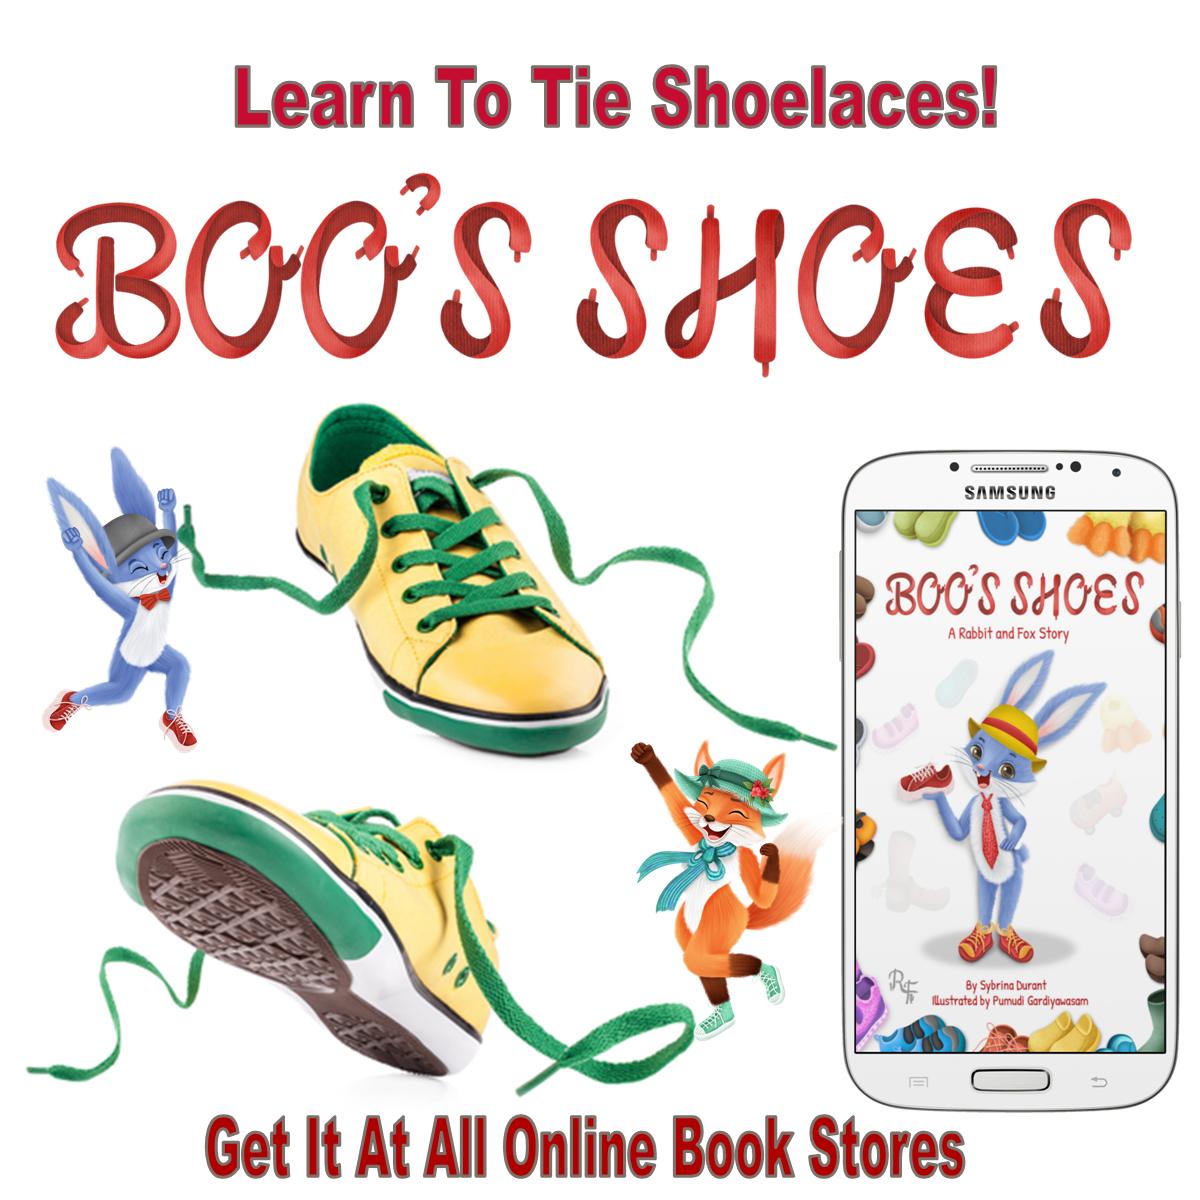 Boo's Shoes - A Rabbit and Fox Story: Learn To Tie Shoelaces